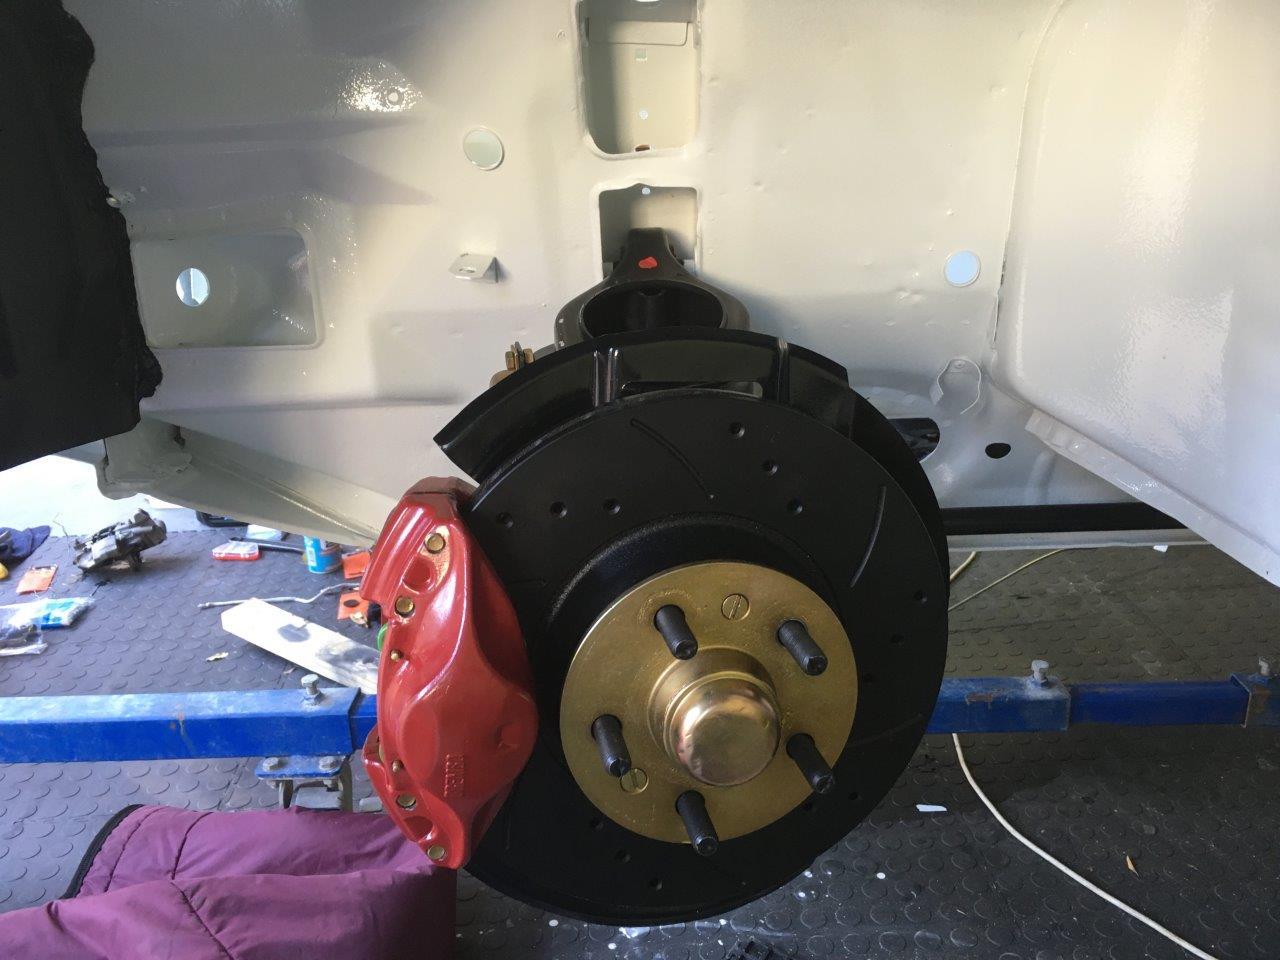 Nicely back together and new brake discs fitted (slotted and grooved) also from EBC Brakes in the UK.